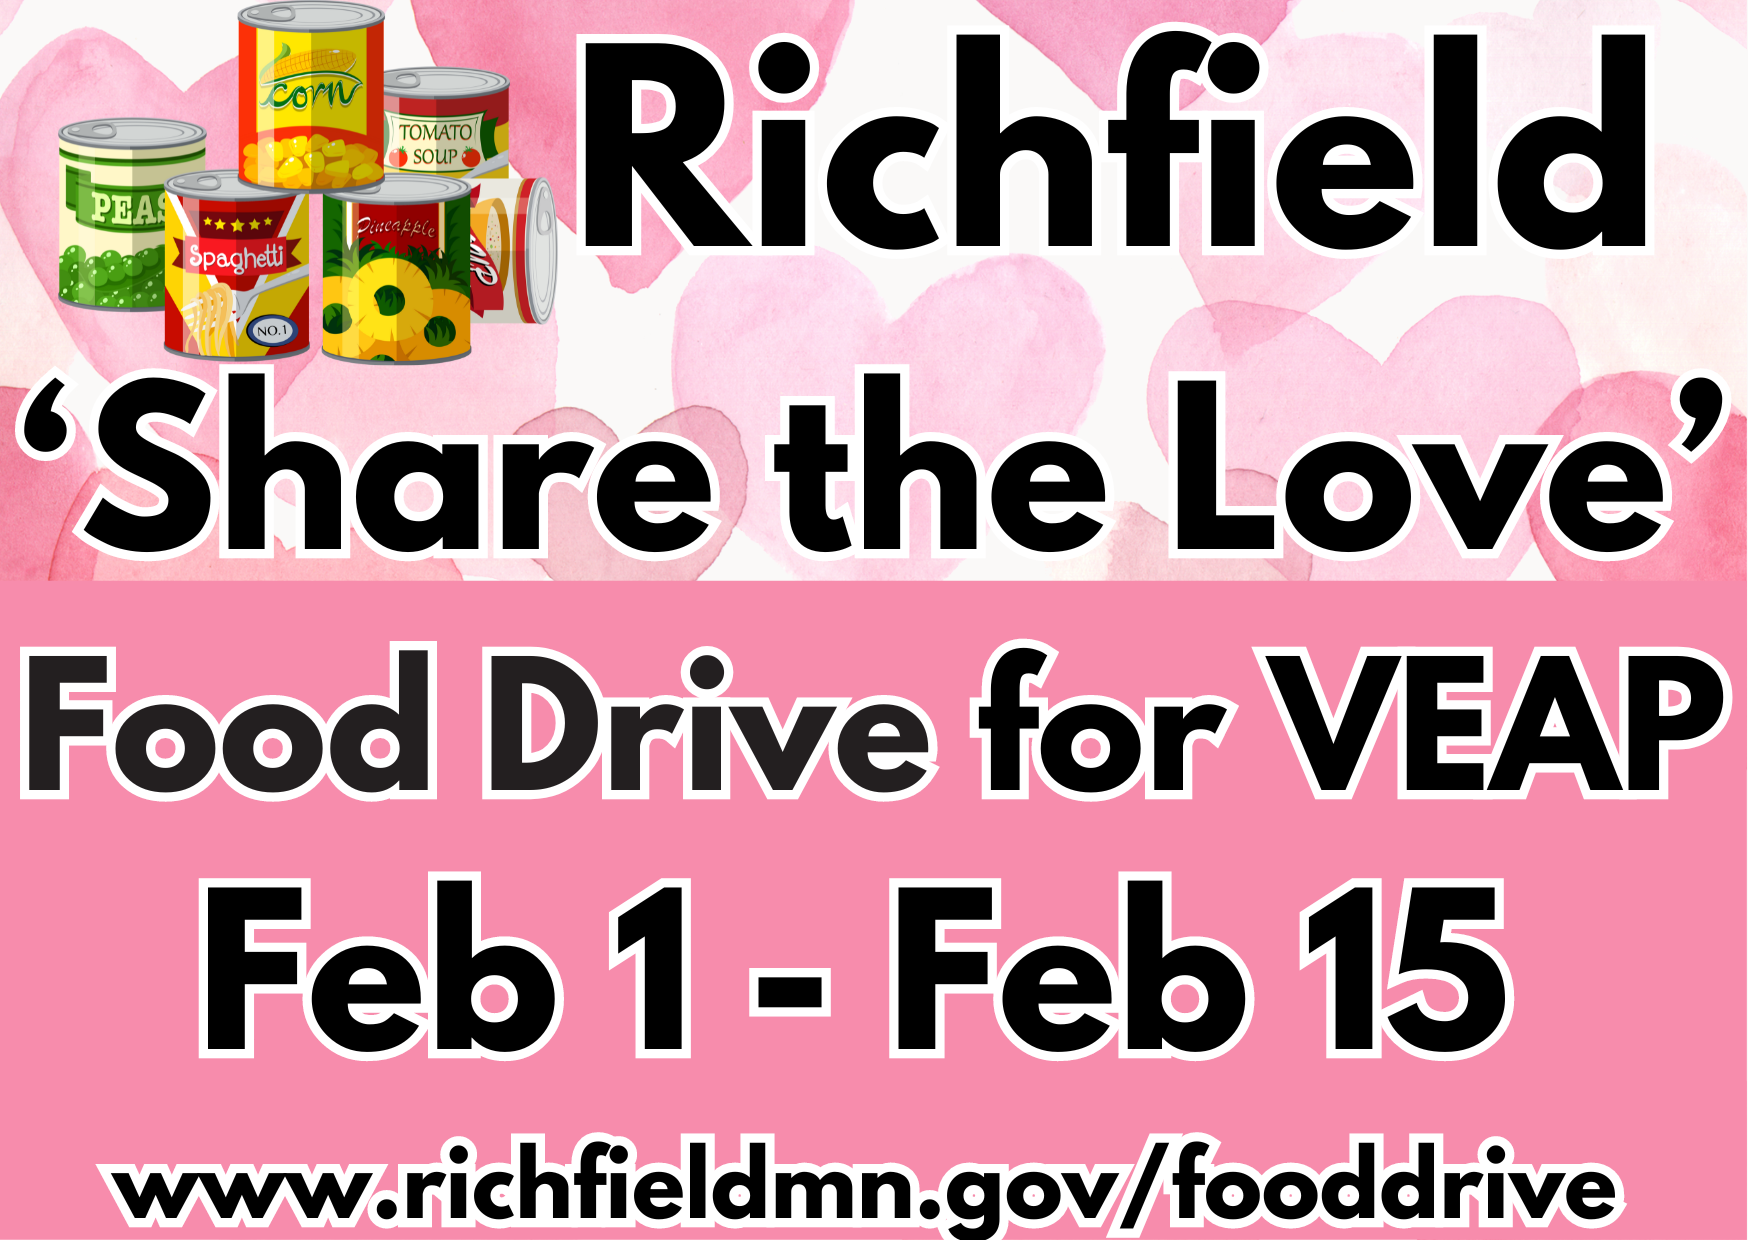 General share the love food drive